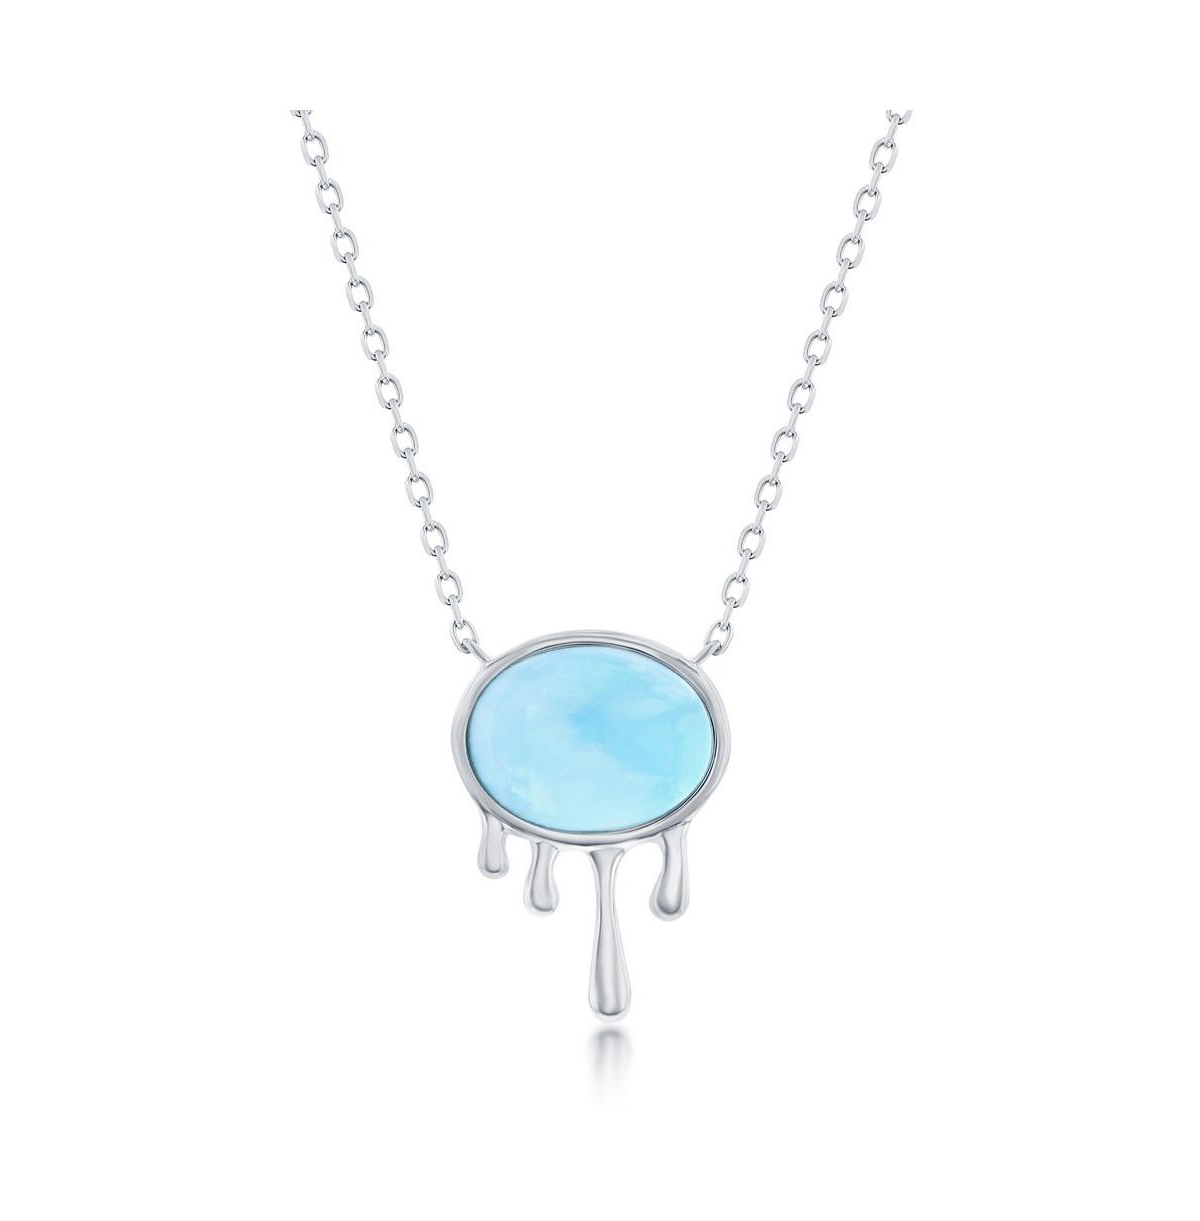 Sterling Silver Oval Larimar, Dripping Design Necklace - Blue